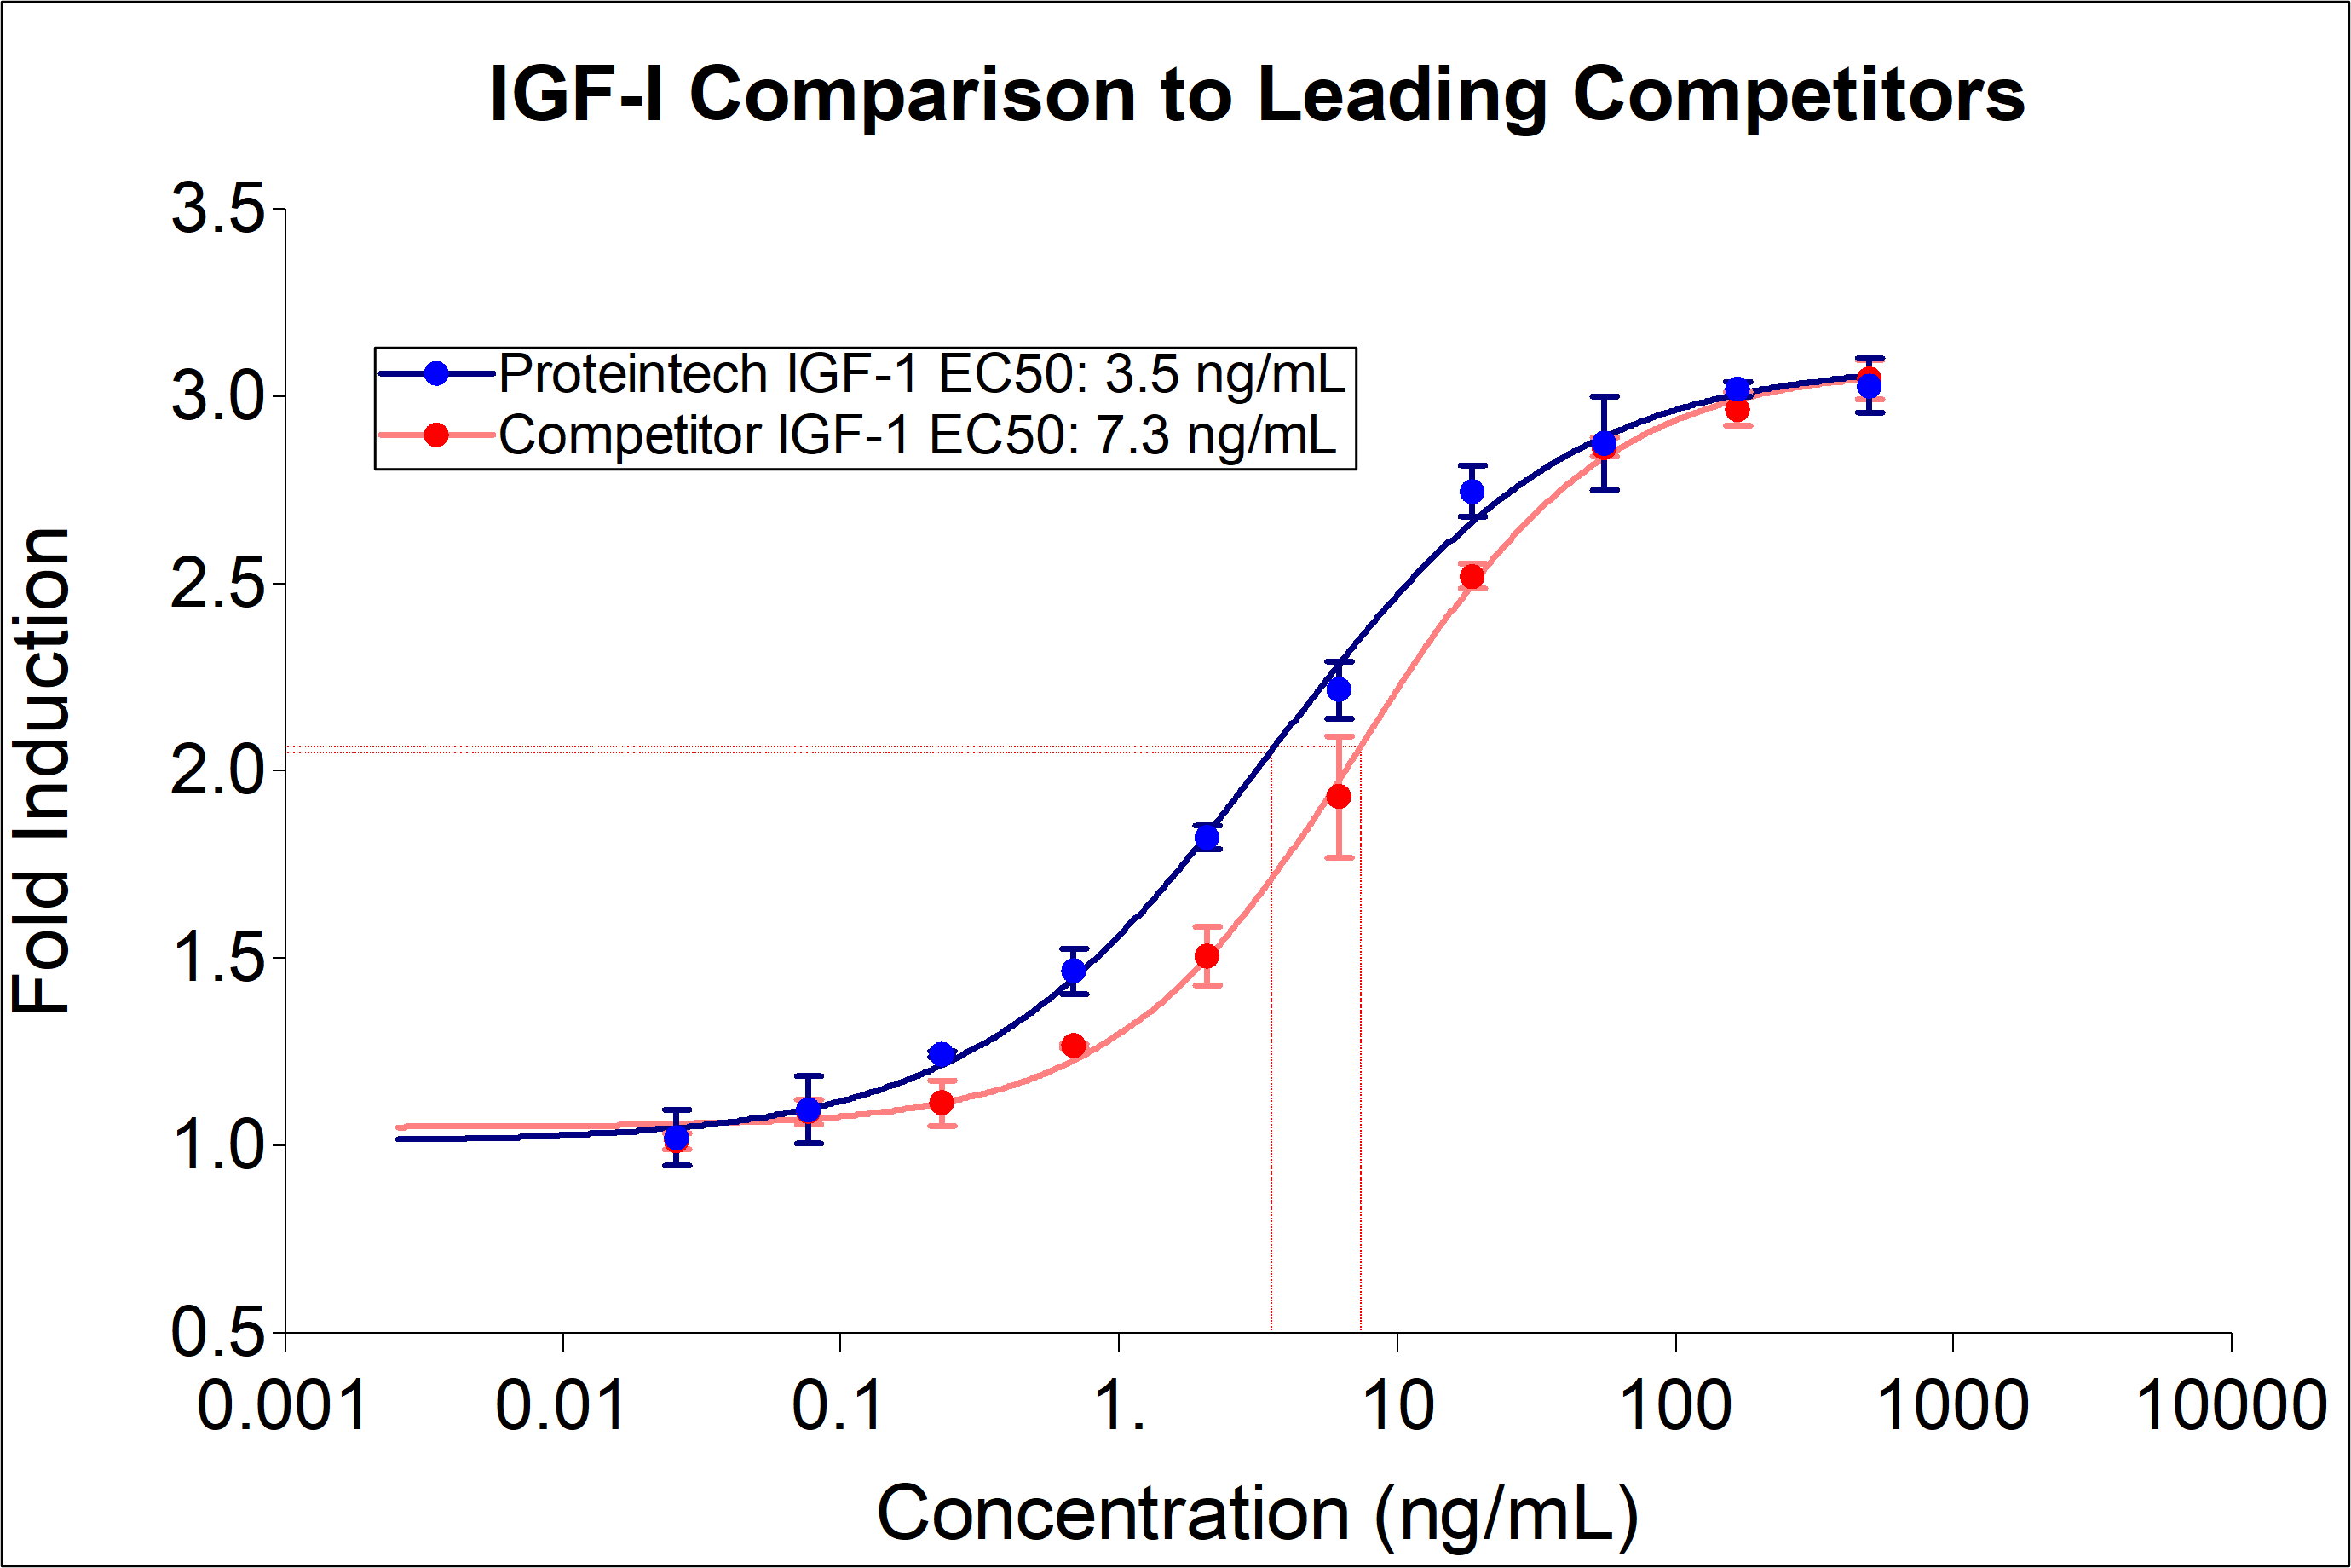 Proteintech IGF-I (Cat no: HZ-1322) demonstrates equivalent fold induction and a 2-fold decrease in EC50 compared to leading competitors. Recombinant human IGF-I stimulates dose-dependent proliferation of the MCF-7 human breast cancer cell line. Cell number was quantitatively assessed by PrestoBlue® Cell Viability Reagent. MCF-7 cells were treated with increasing concentrations of recombinant IGF-I for 96 hours. The EC50 was determined using a 4-parameter non-linear regression model. The EC50 range is 2-14 ng/mL.